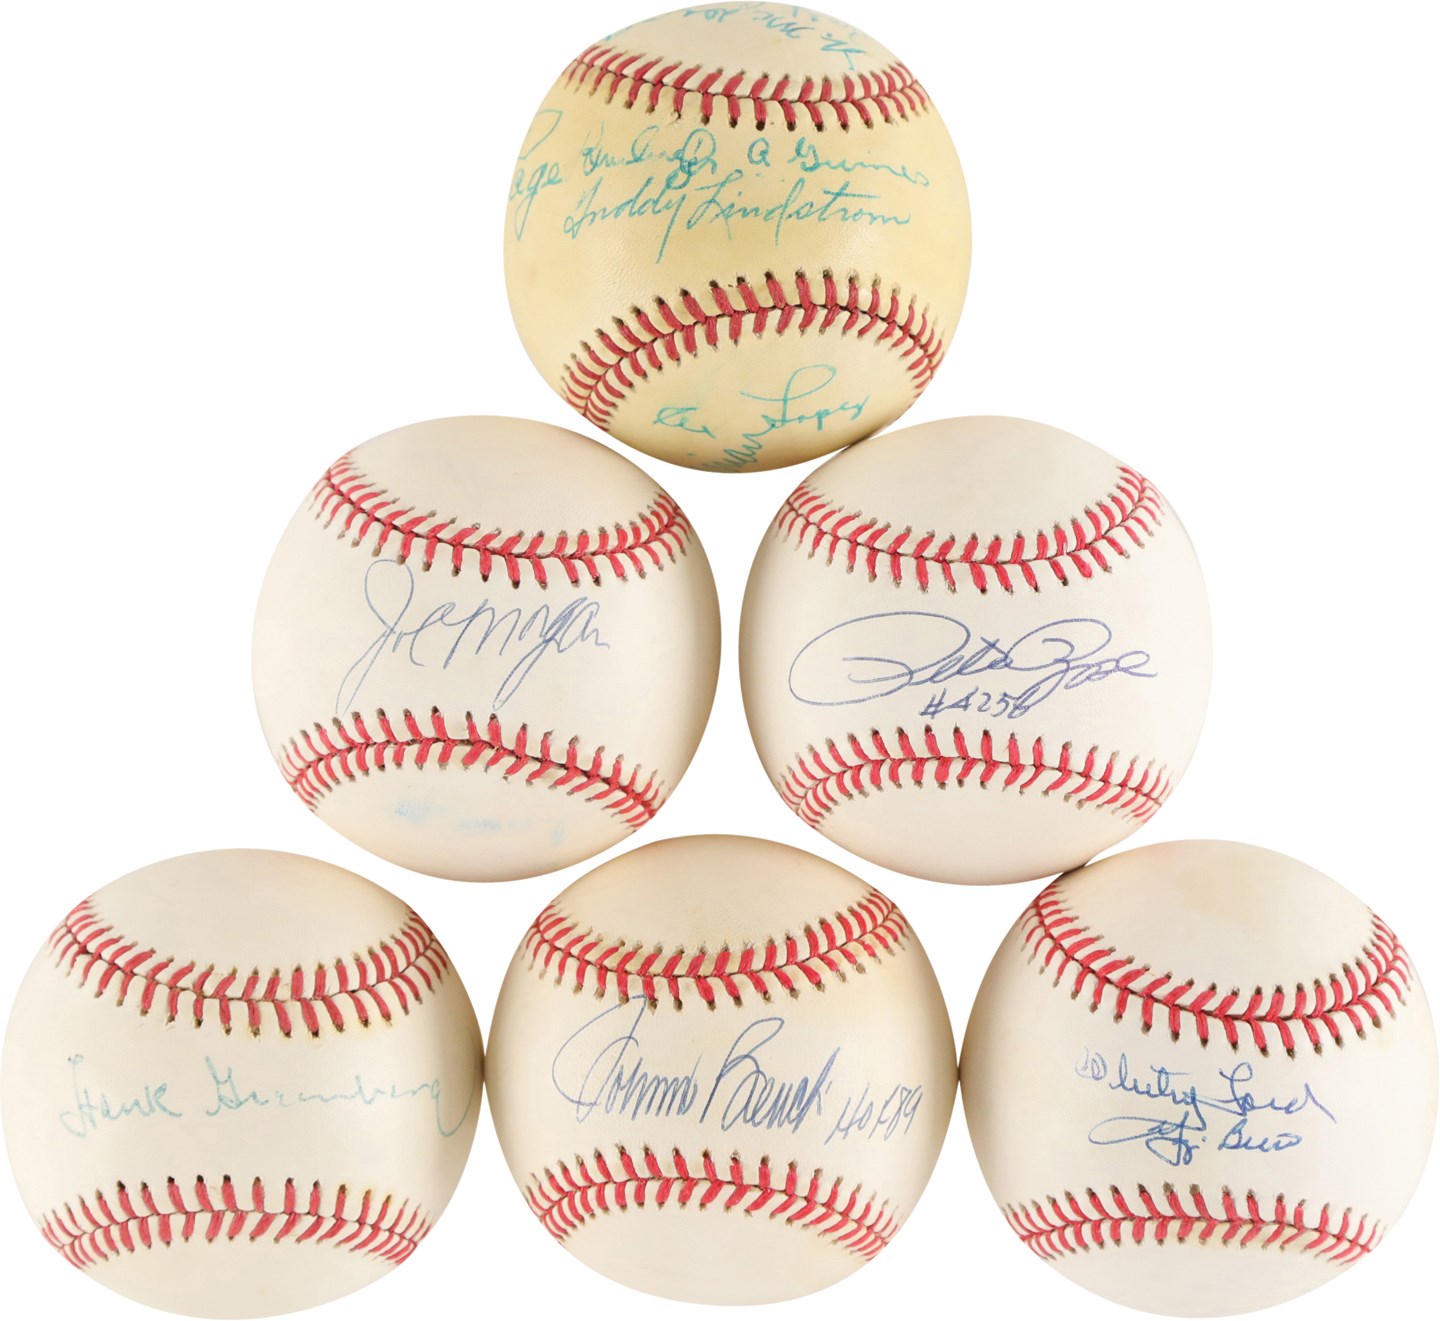 - Hall of Famers & Stars Signed Baseball Collection (89)